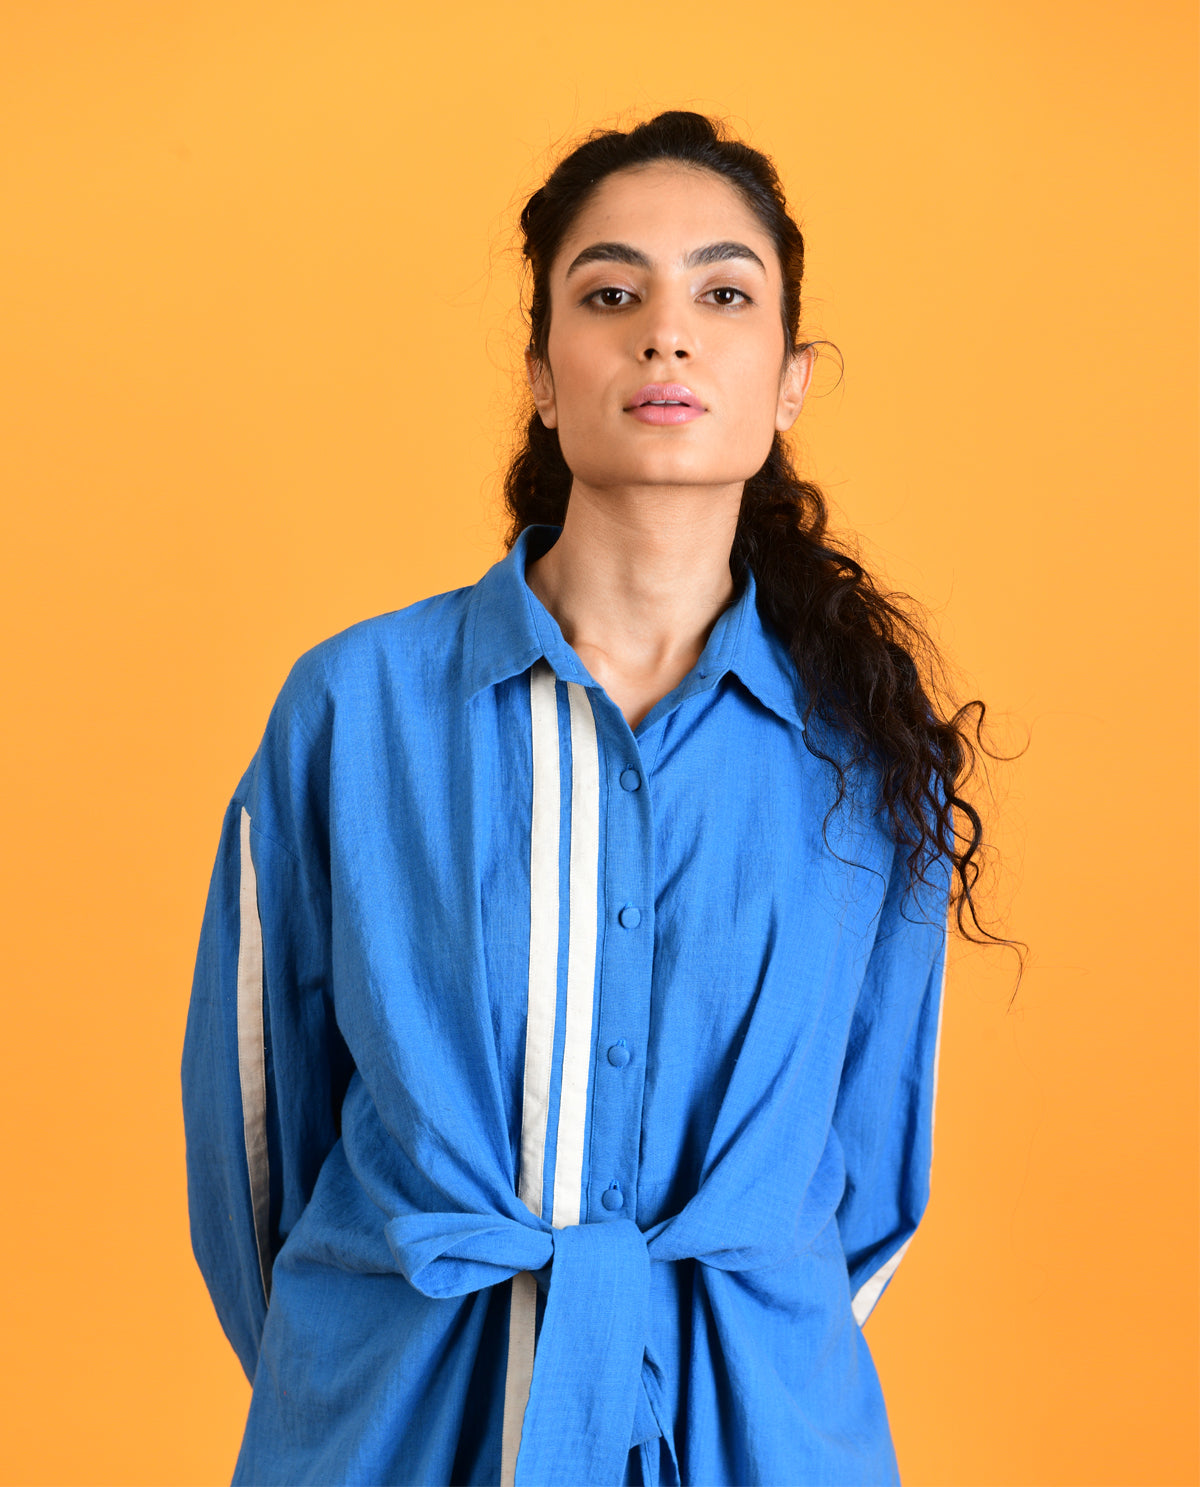 Blue Tie Up Midi Dress by Rias Jaipur with Blue, Casual Wear, For Anniversary, Handloom Cotton, Handspun, Handwoven, Hue, Midi Dresses, Relaxed Fit, Rias Hue by Rias Jaipur, Shirt Dresses, solid, Solids, Stripes, Womenswear at Kamakhyaa for sustainable fashion